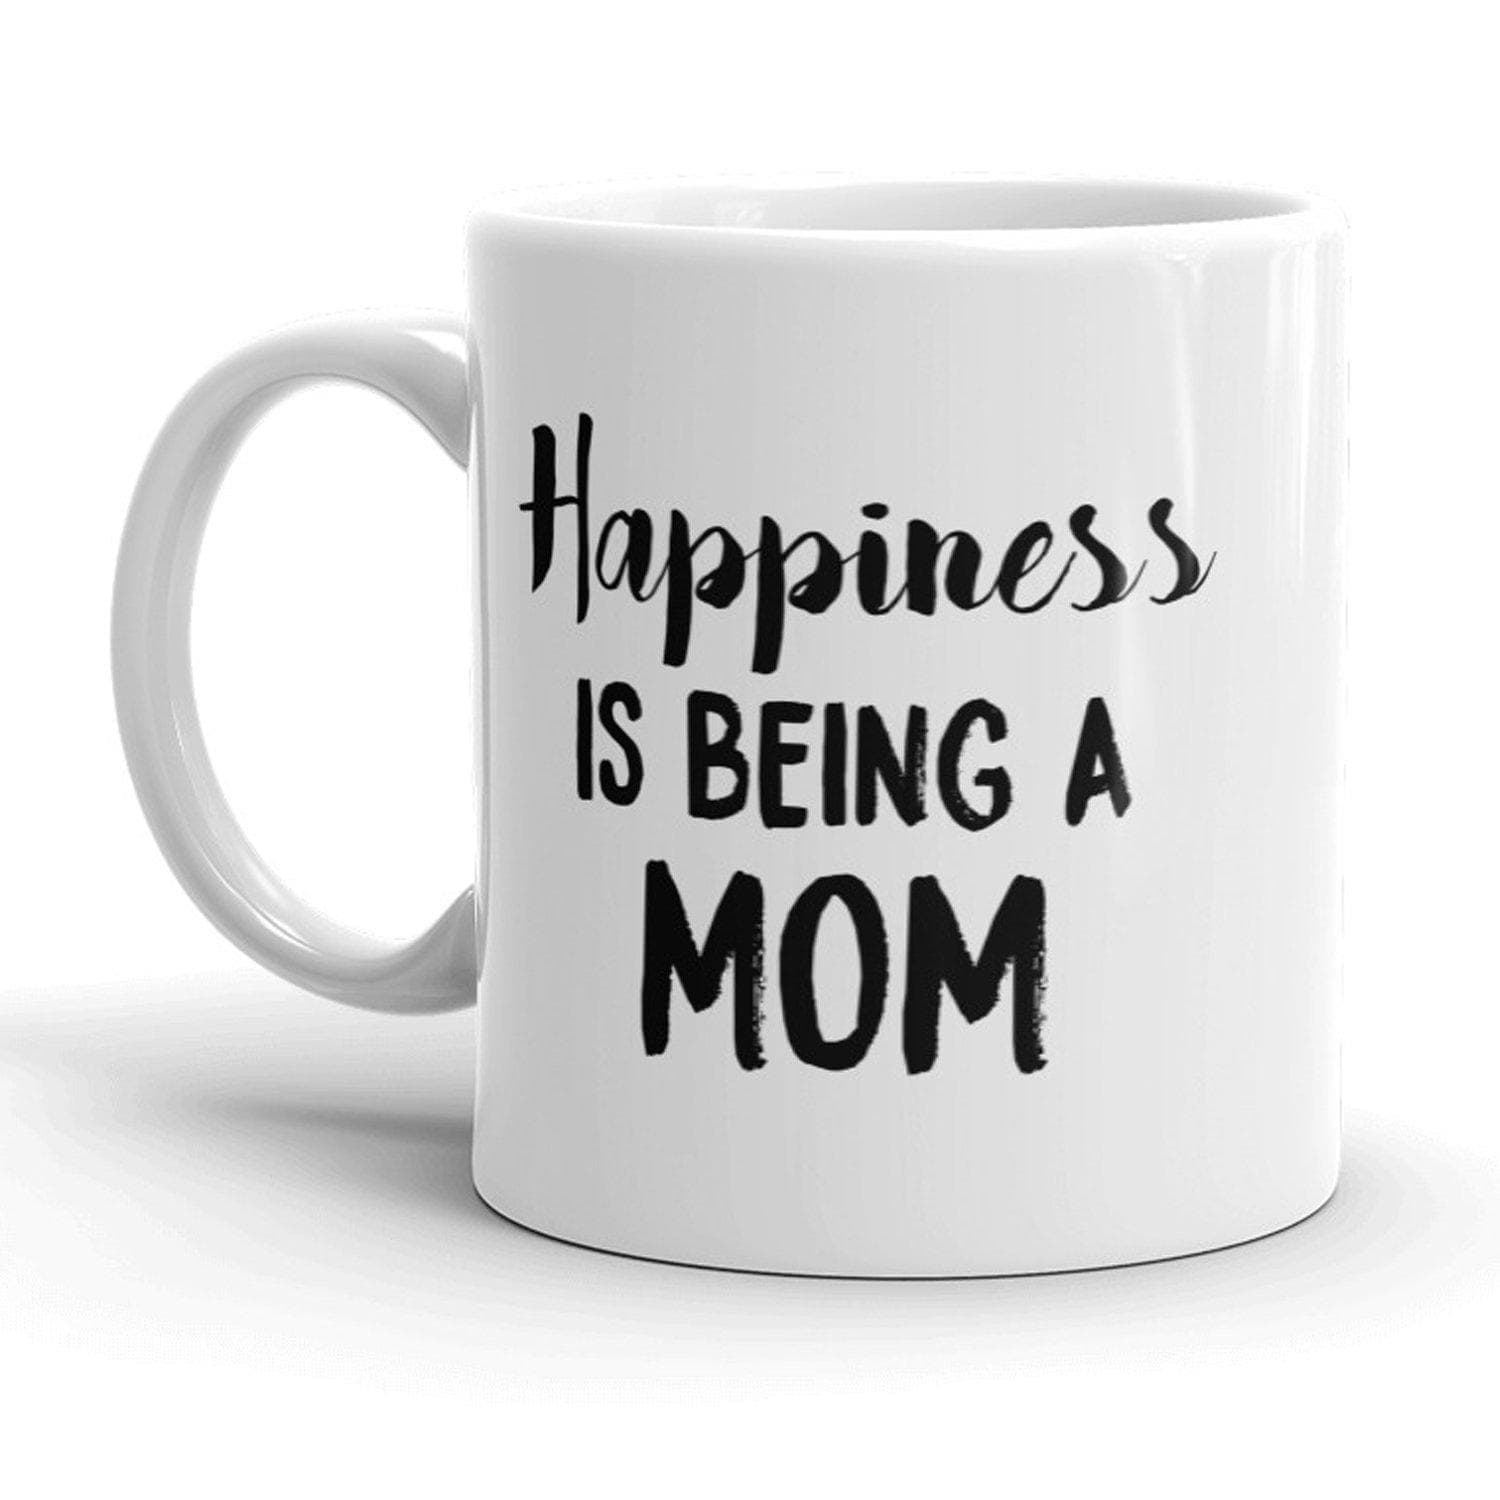 Happiness Is Being A Mom Mug - Crazy Dog T-Shirts